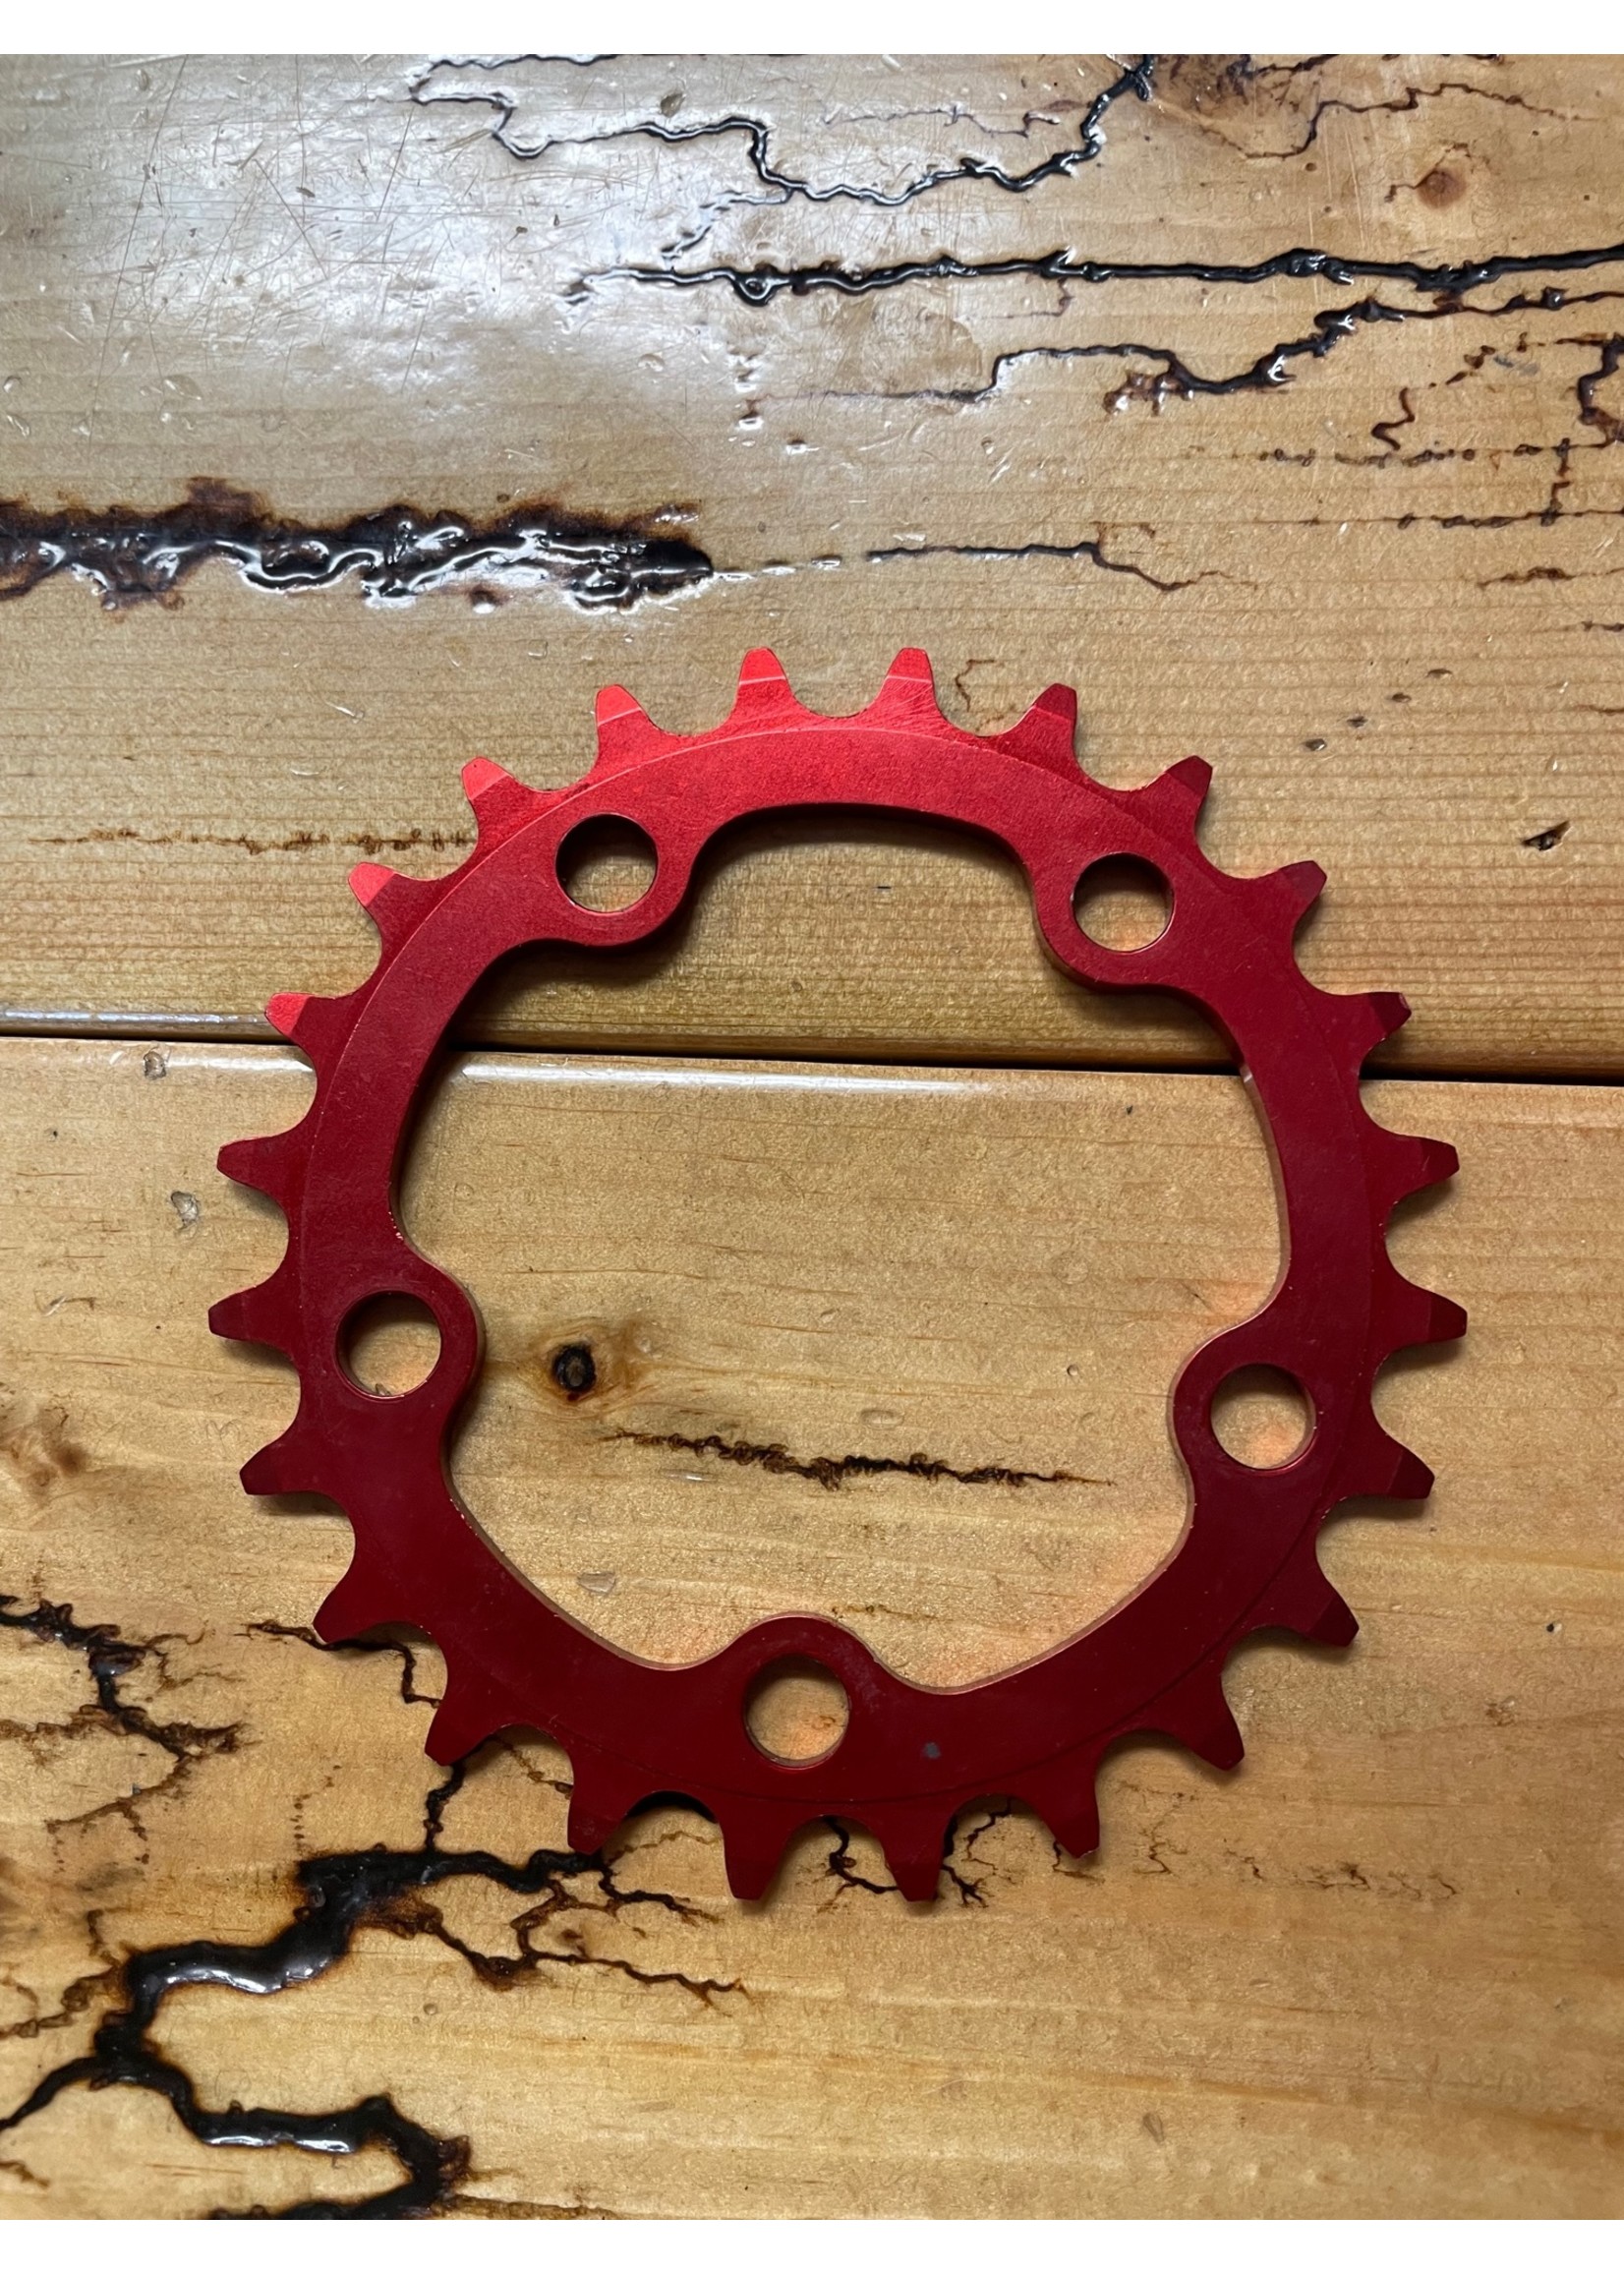 Vuelta Vuelta Red Anodized 24 Tooth 5 Bolt 74 BCD Chainring